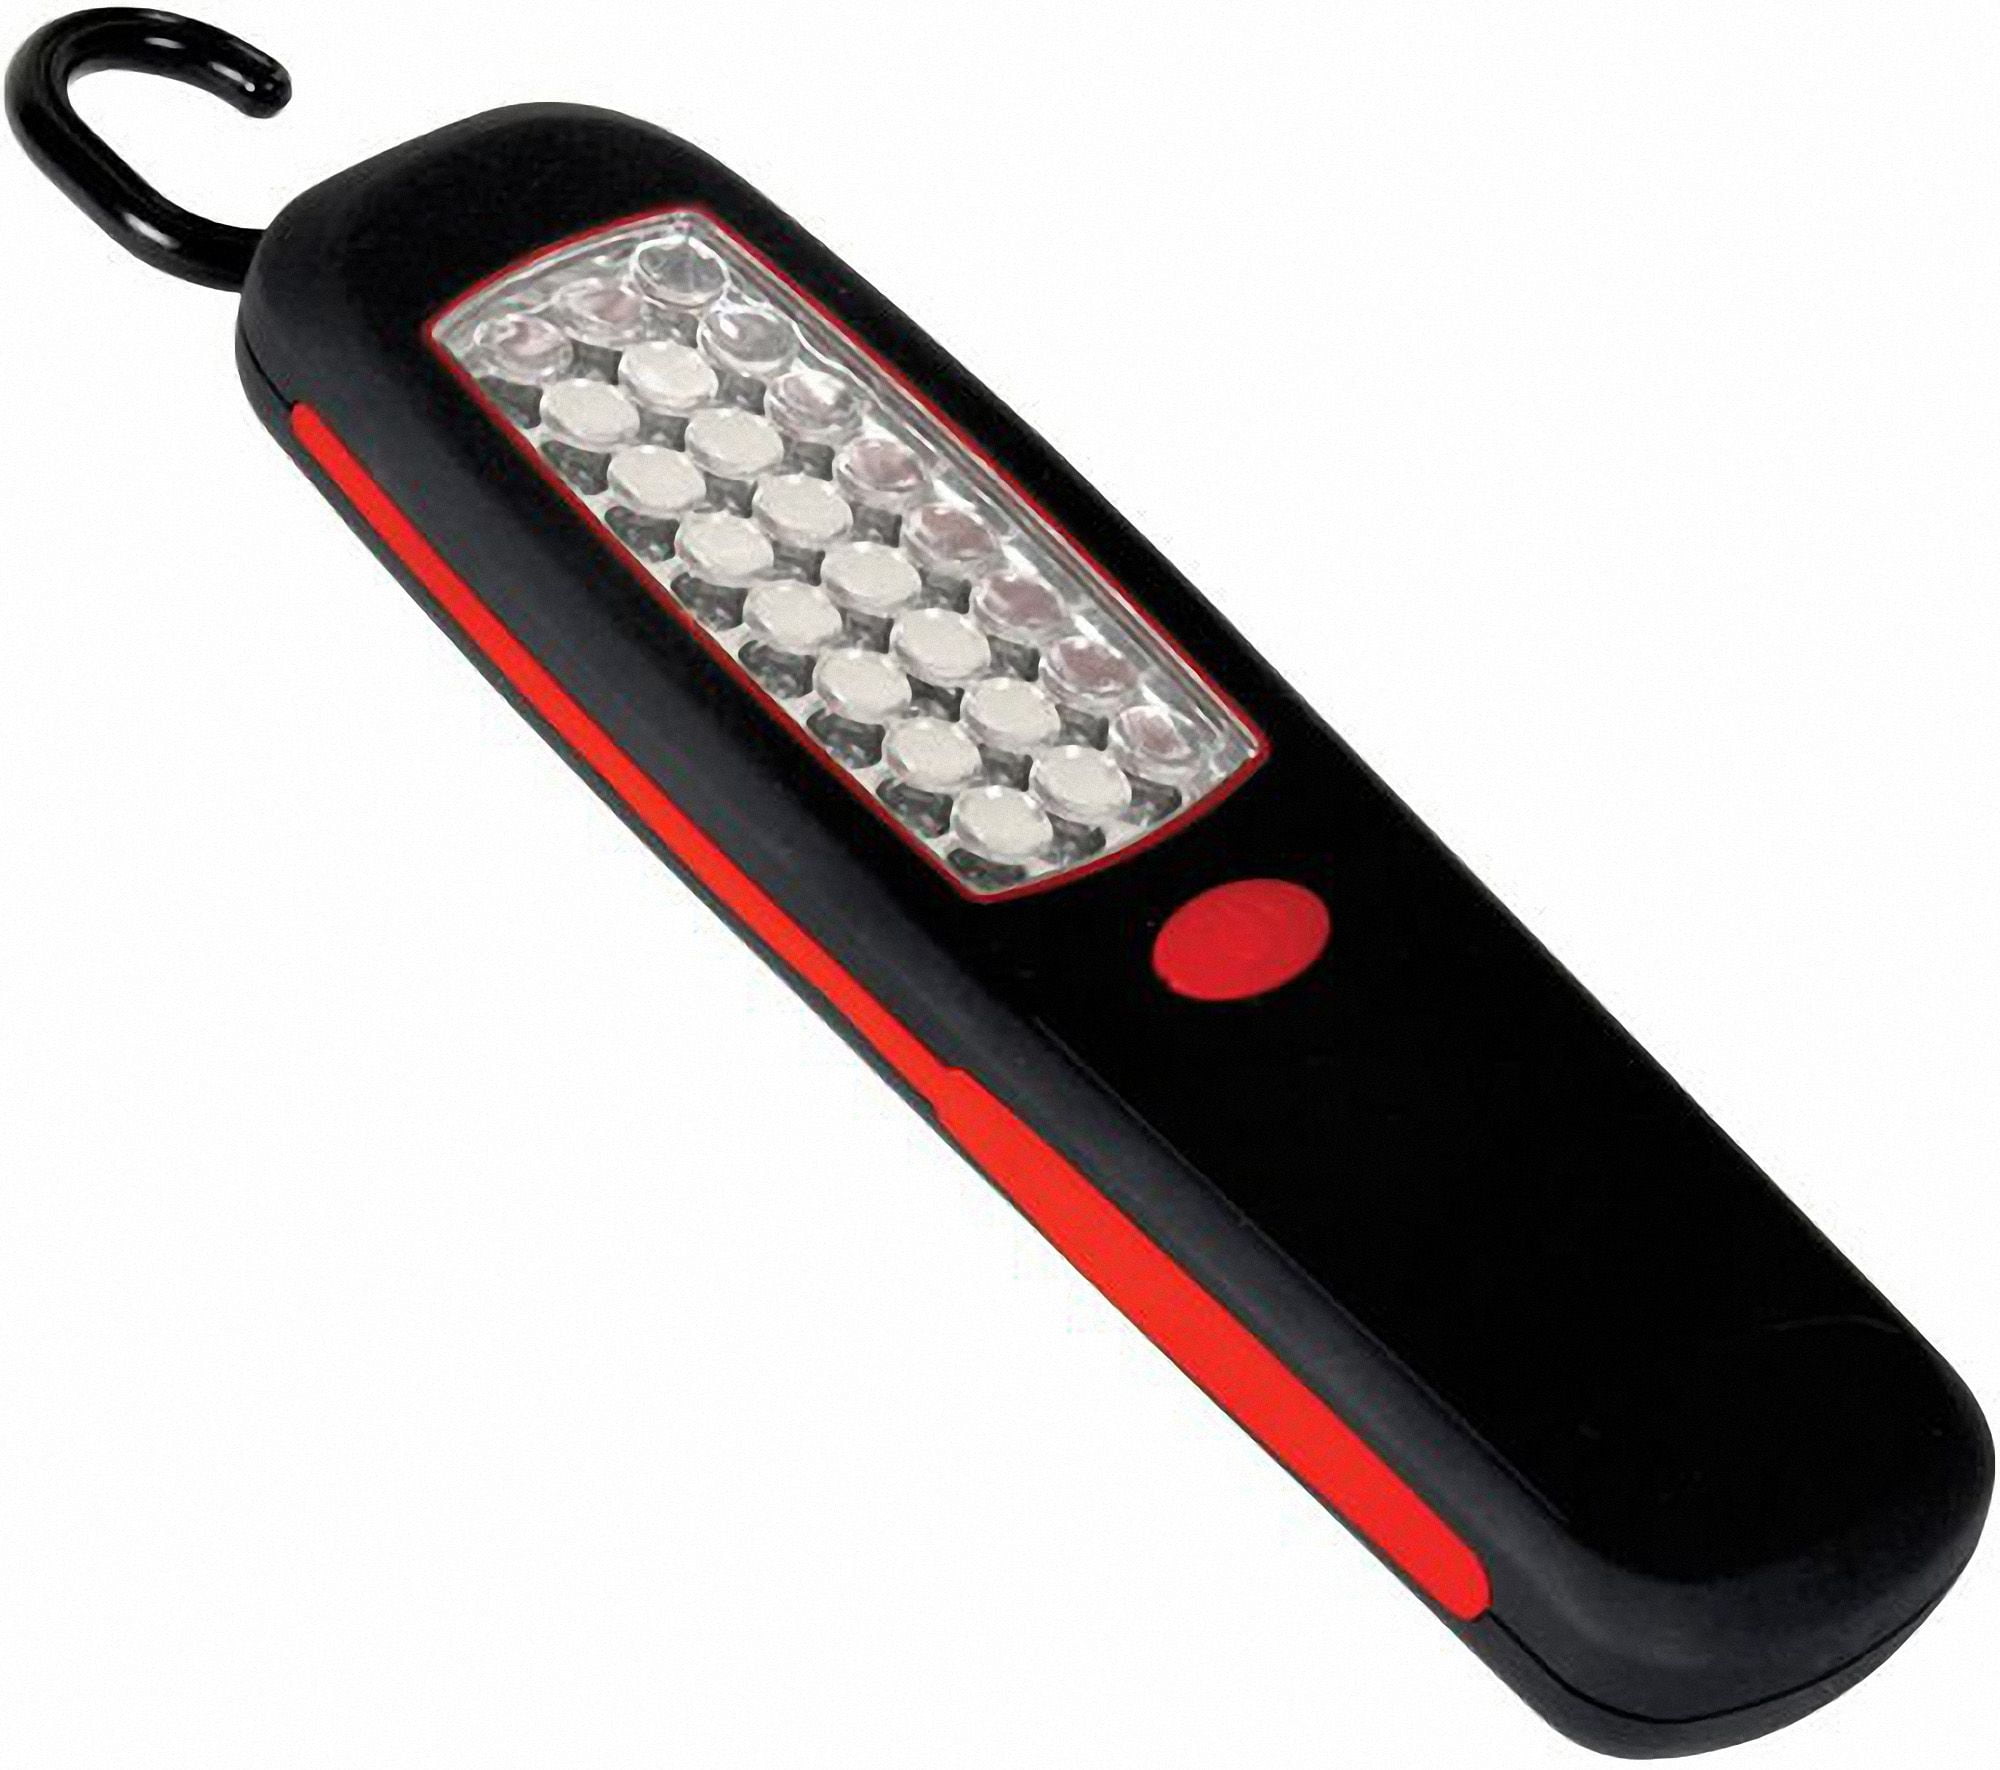 WanEway 24 LED MAGNETIC OR HANGING INSPECTION WORKLIGHT SUPER BRIGHT LIGHT 